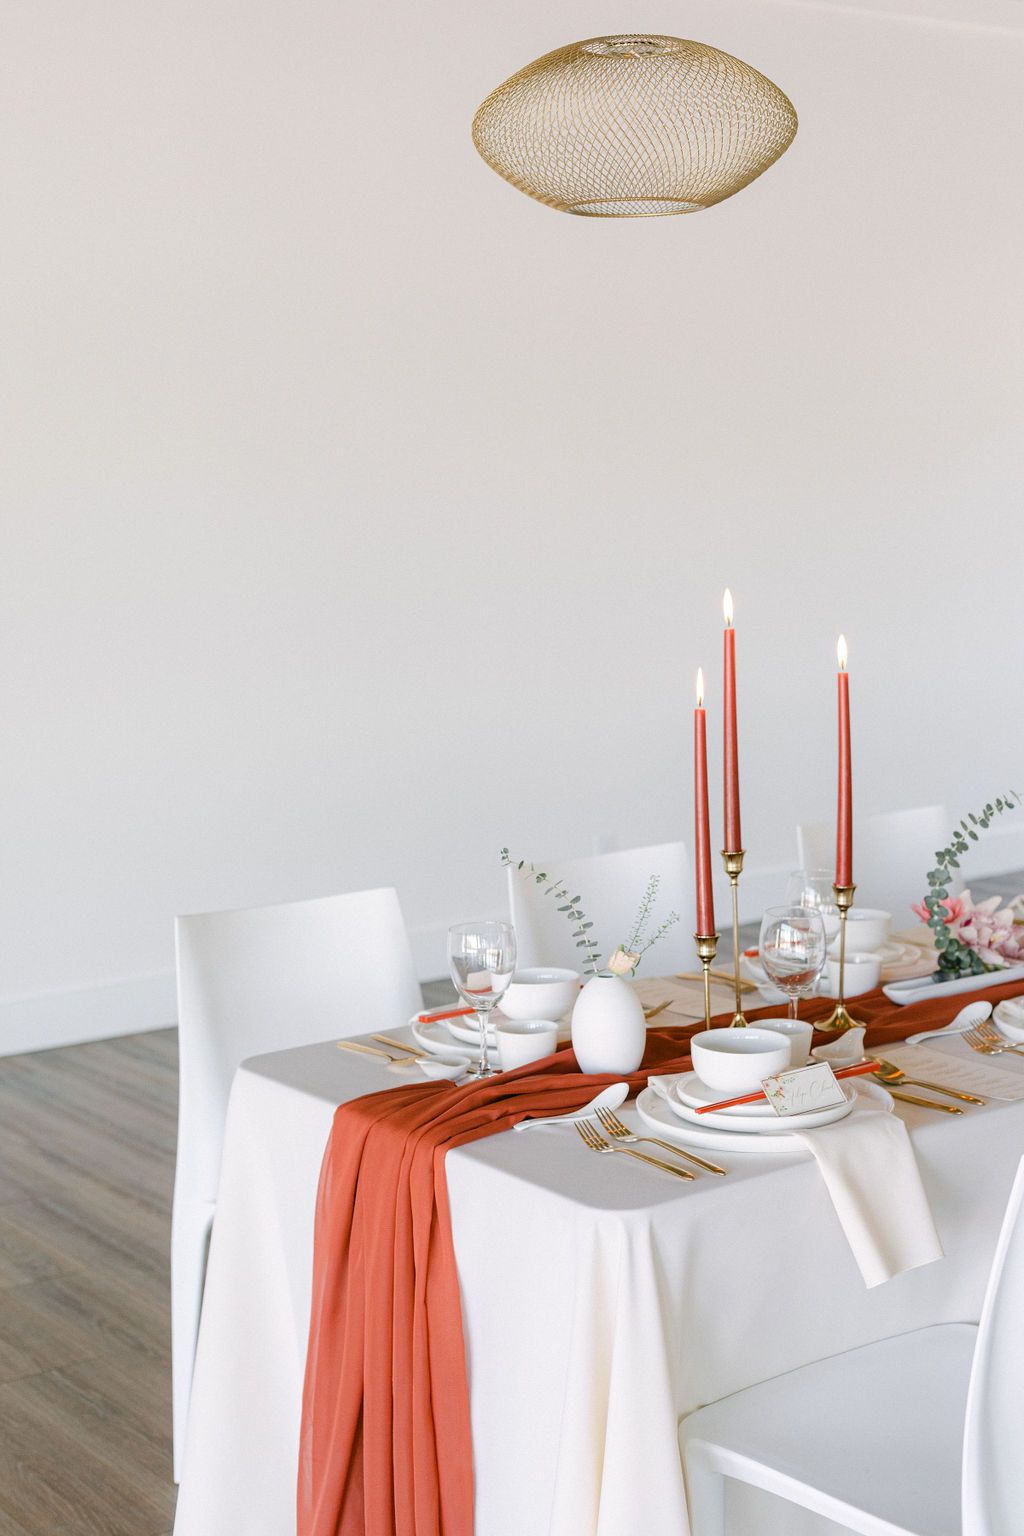 White and Red Modern Tablescape with Asian inspired decor and bold modern accents.